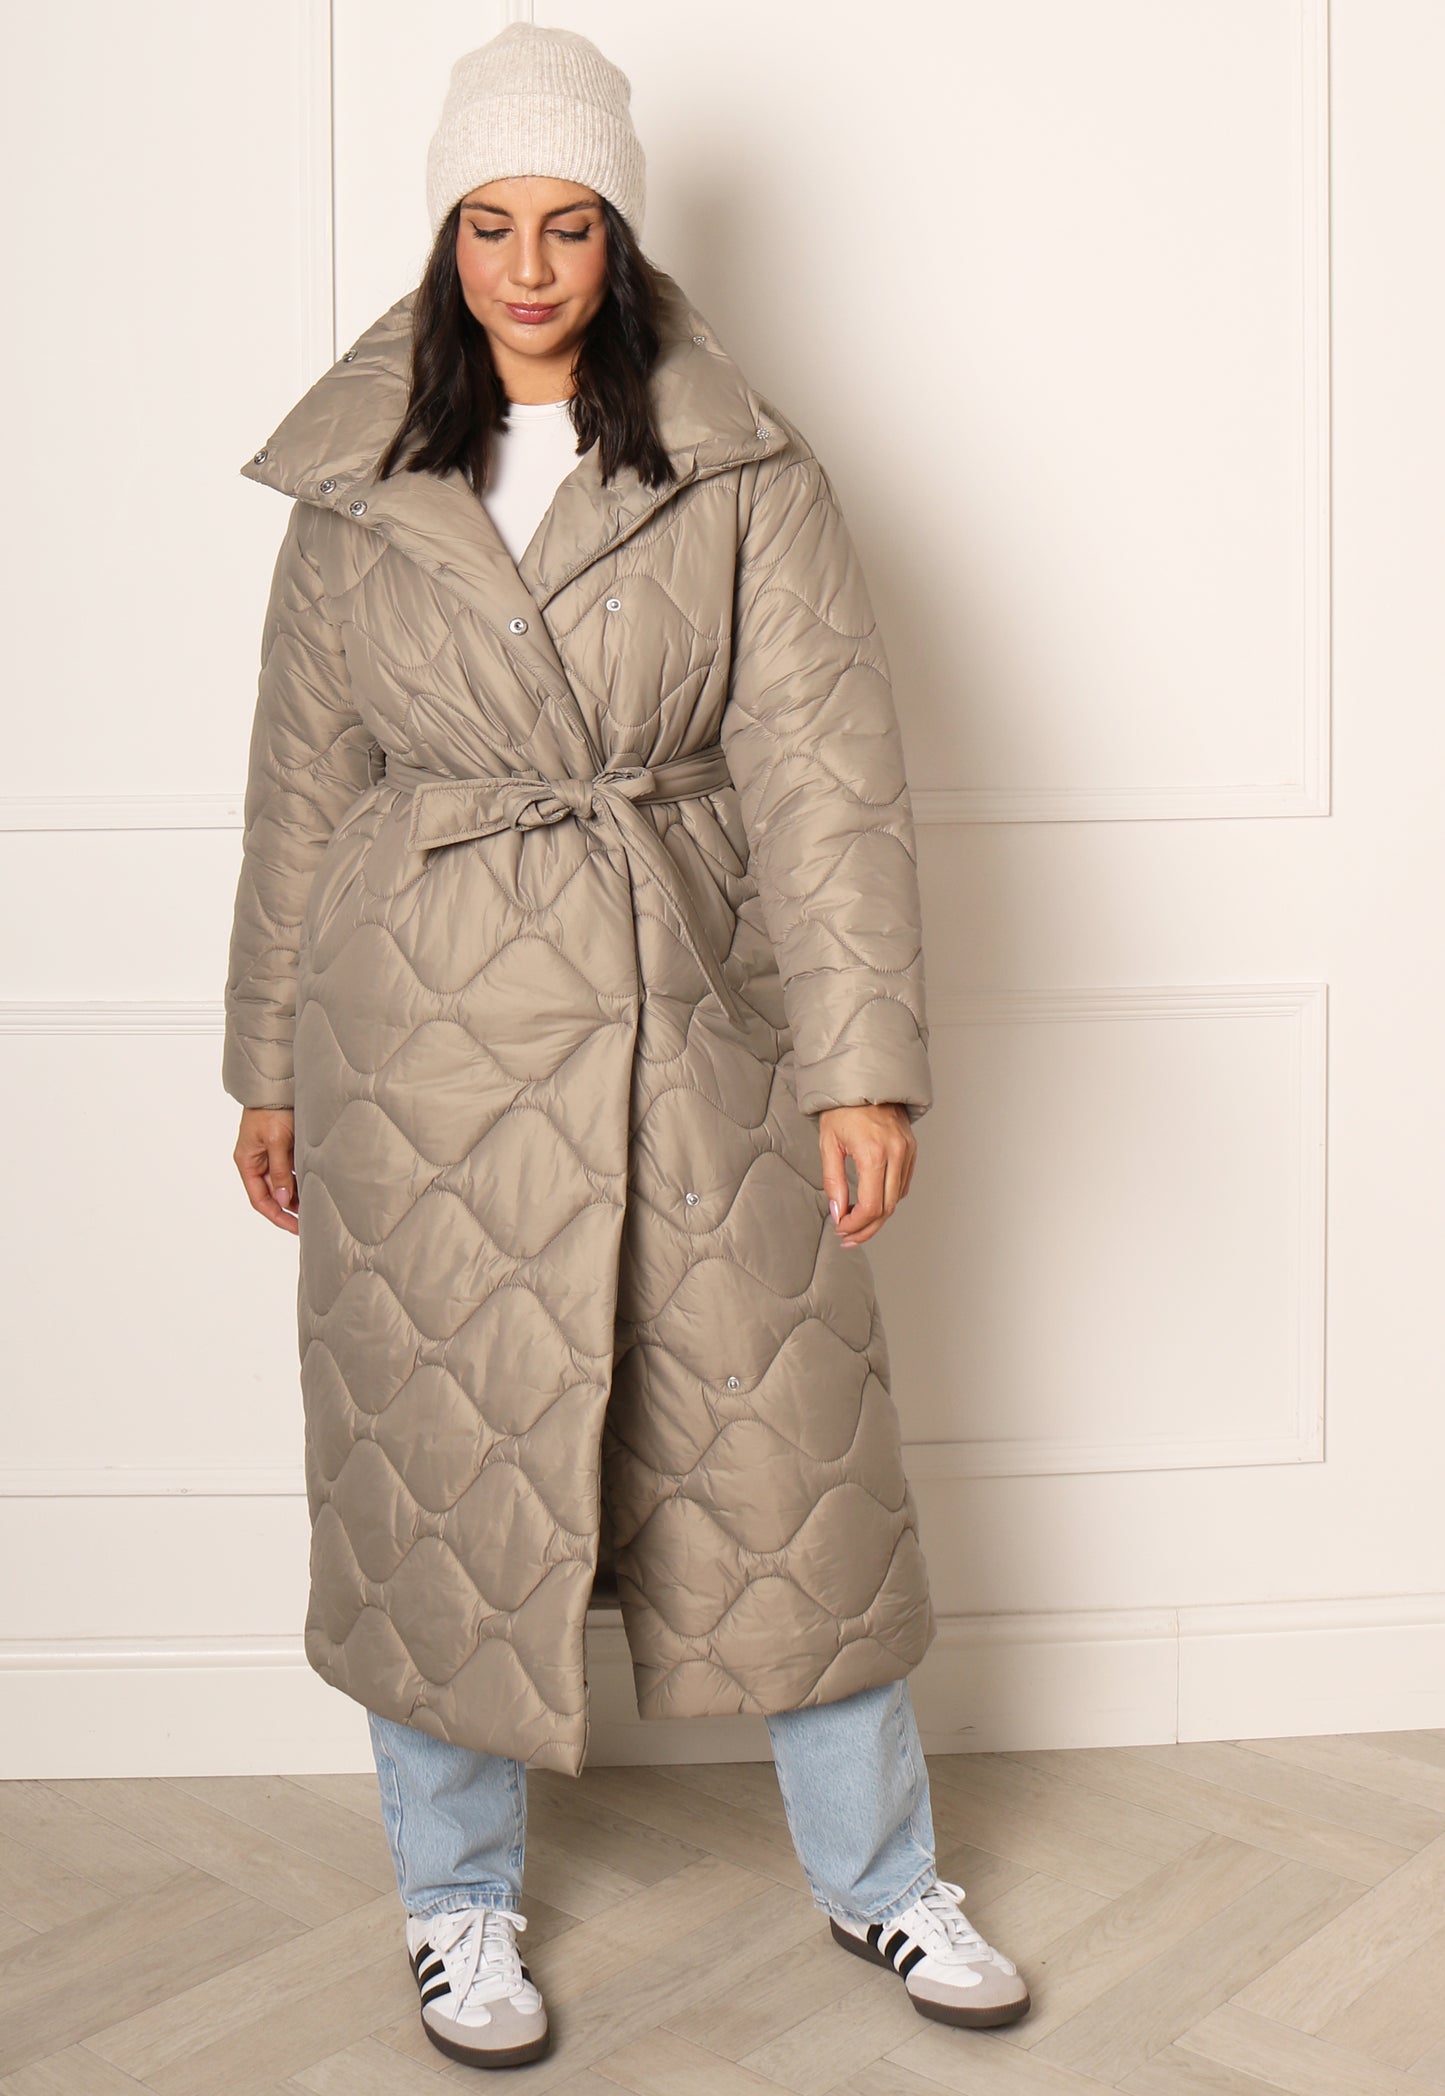 VERO MODA Astoria Onion Quilted Midi Jacket with High Neck & Belt in Soft Khaki - One Nation Clothing